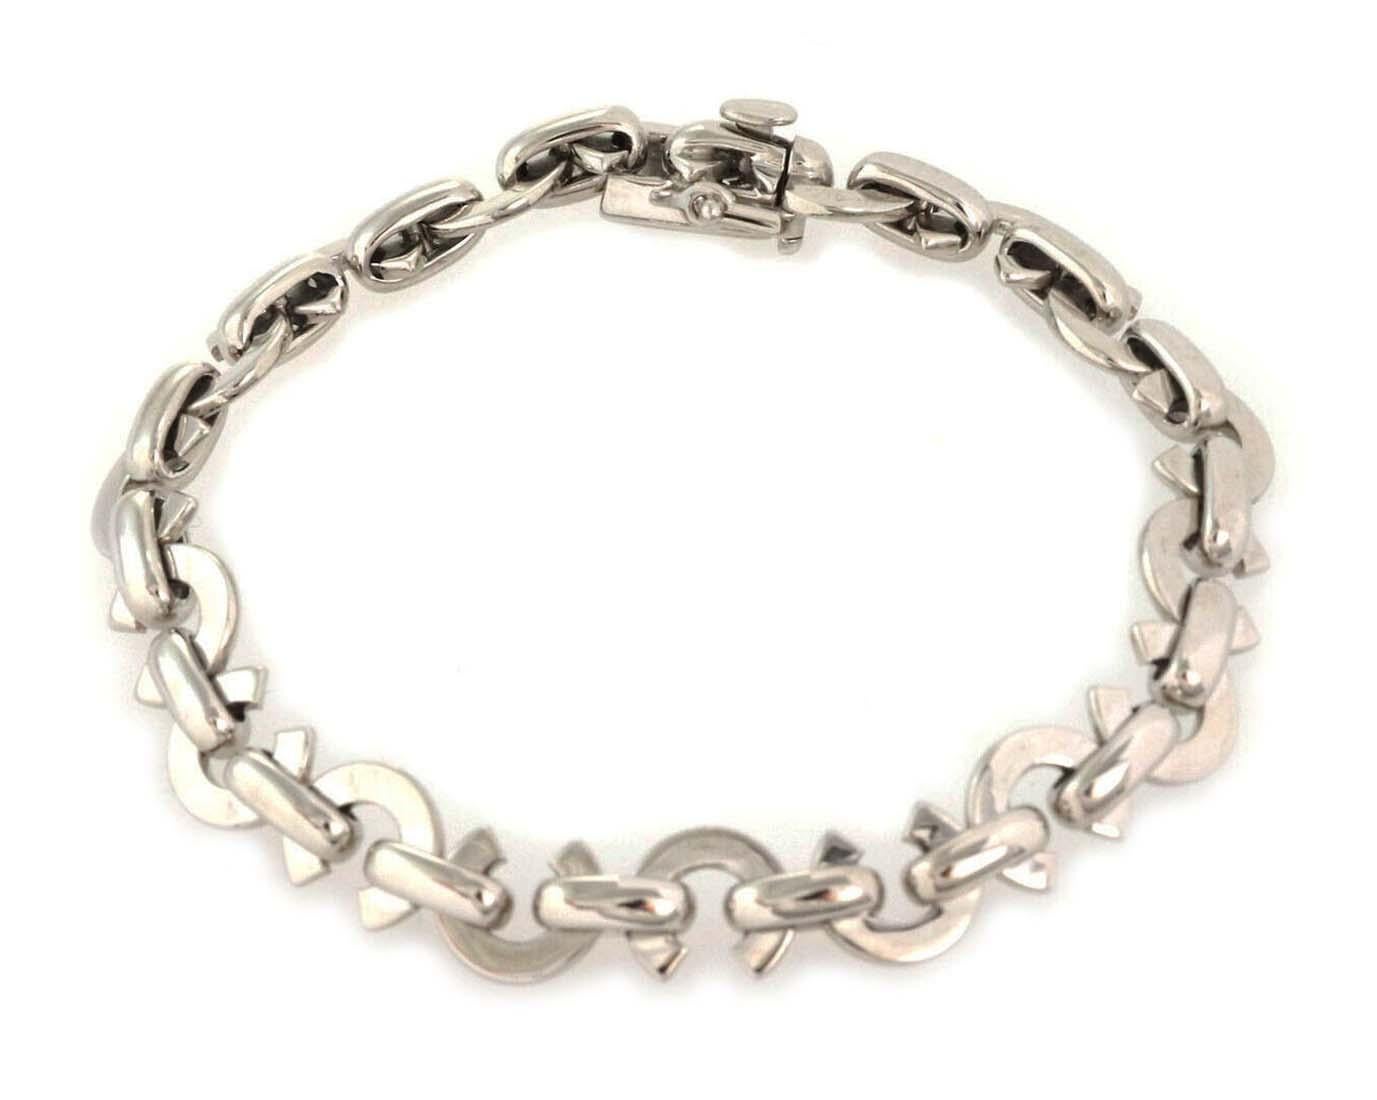 This authentic bracelet is by designer Chanel, it is crafted from 18k white gold with a polished finish featuring C links, each joined together by an oval link. The bracelet secures with a push in clasp and has full designer signature with the gold